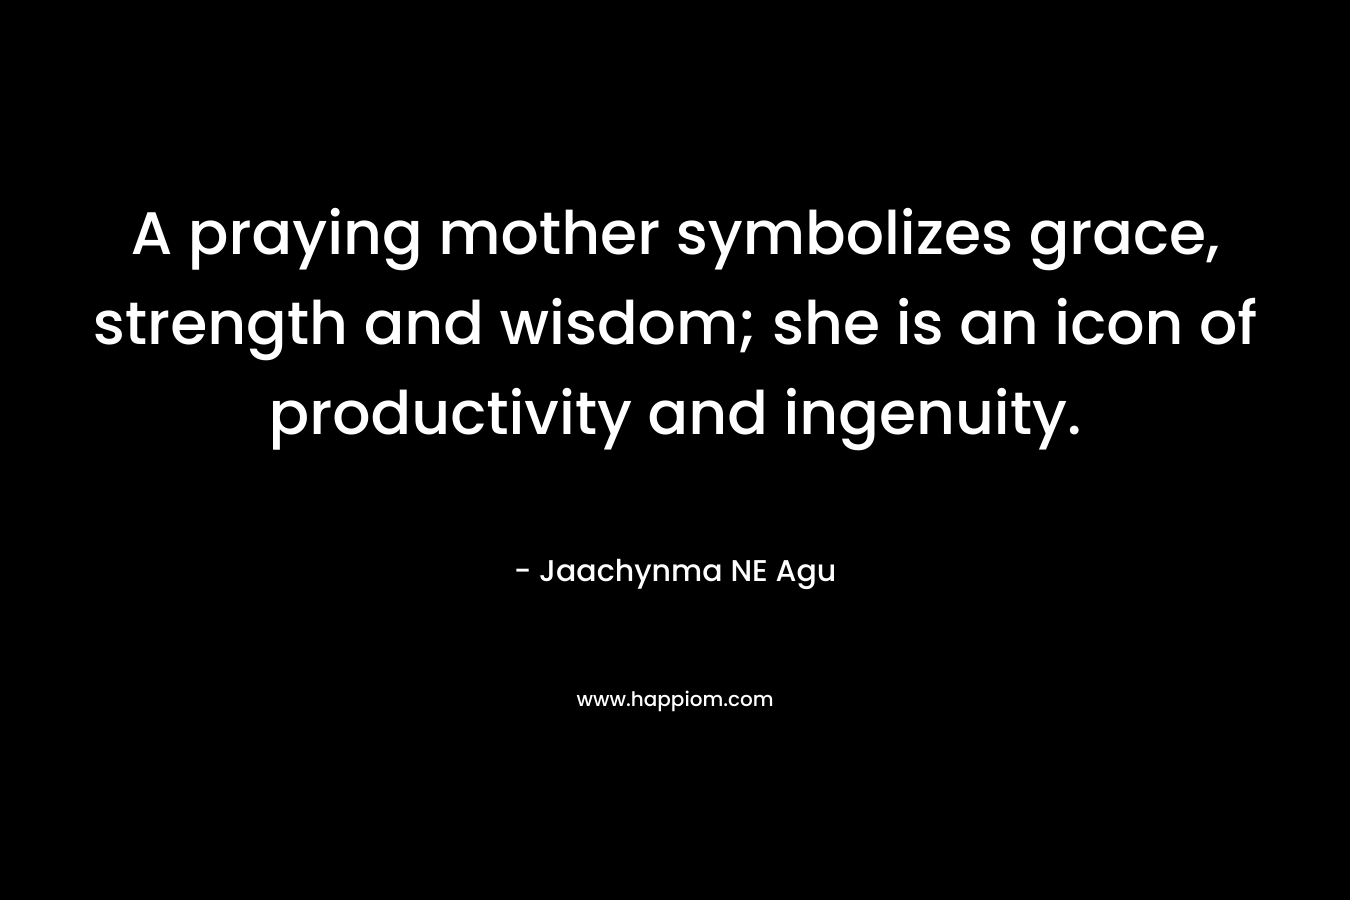 A praying mother symbolizes grace, strength and wisdom; she is an icon of productivity and ingenuity.